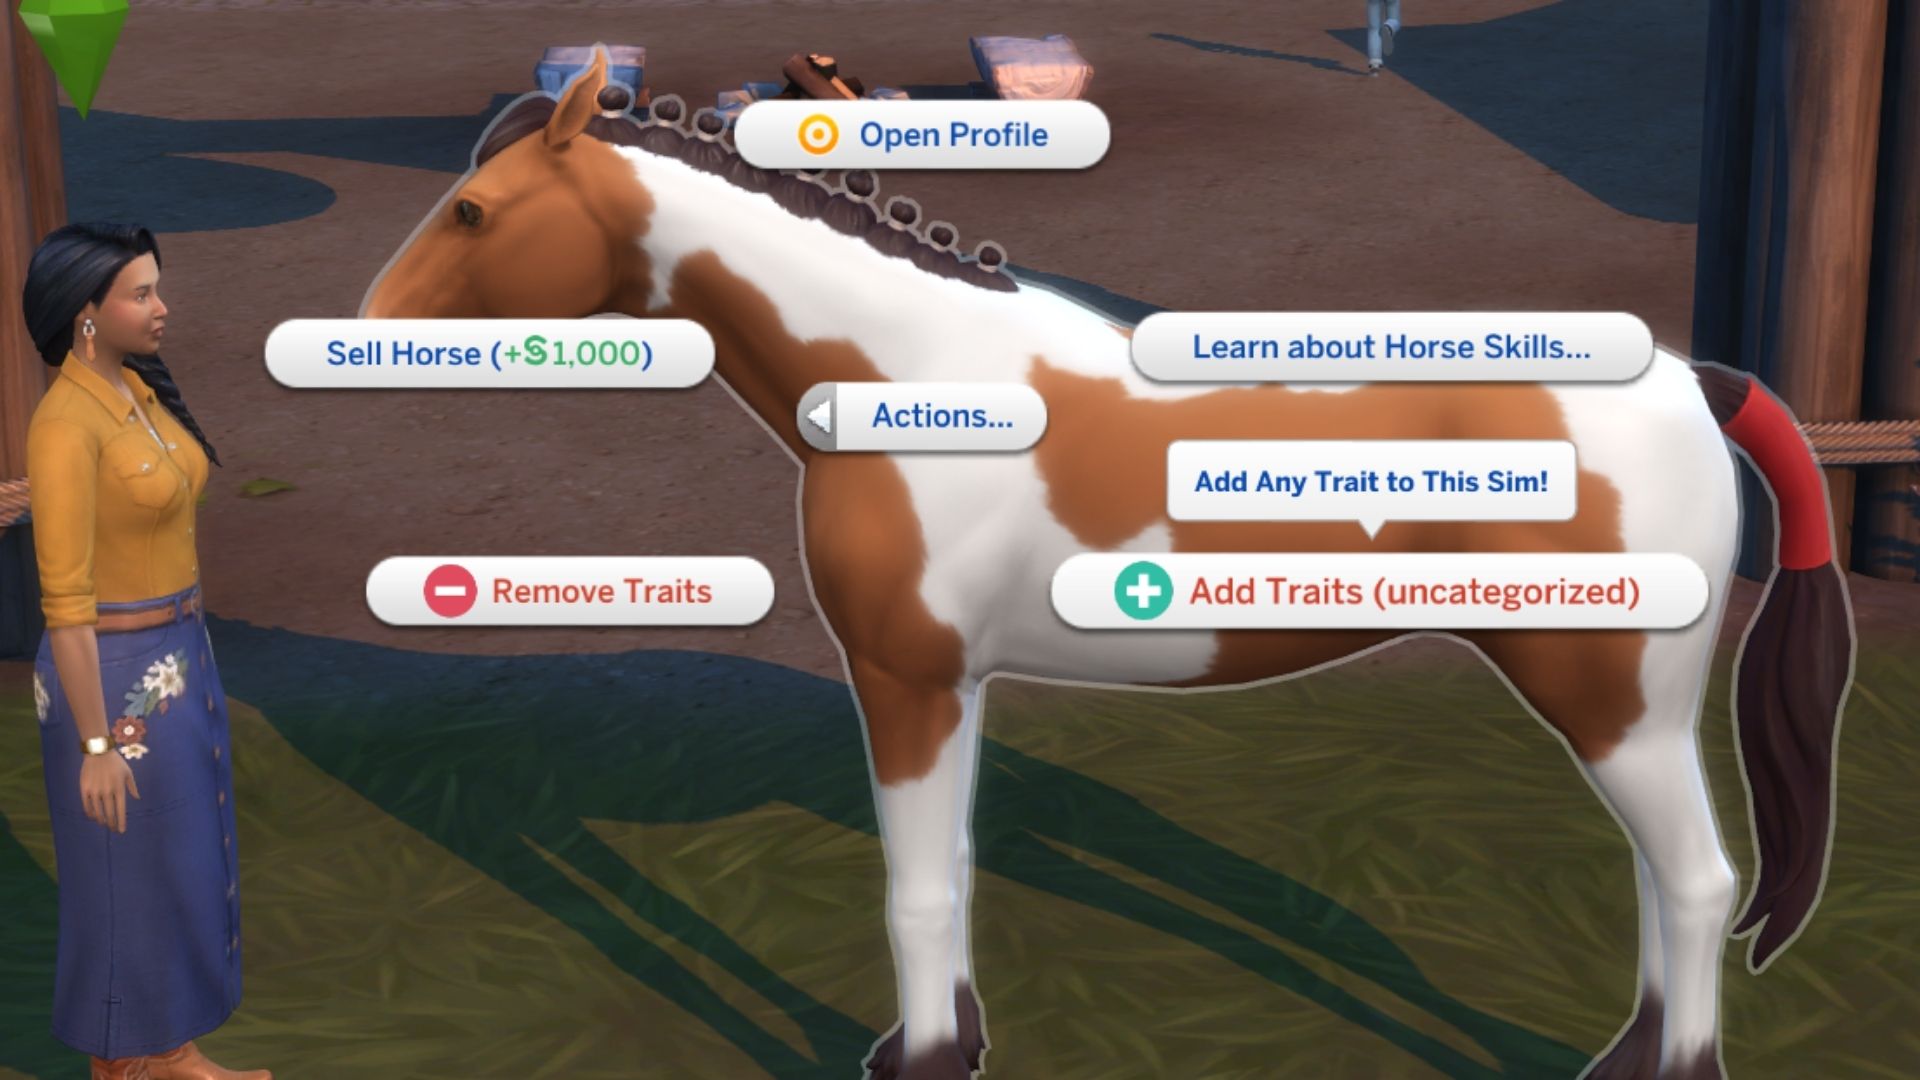 I just noticed in the main menu for Sims 4, they're actually